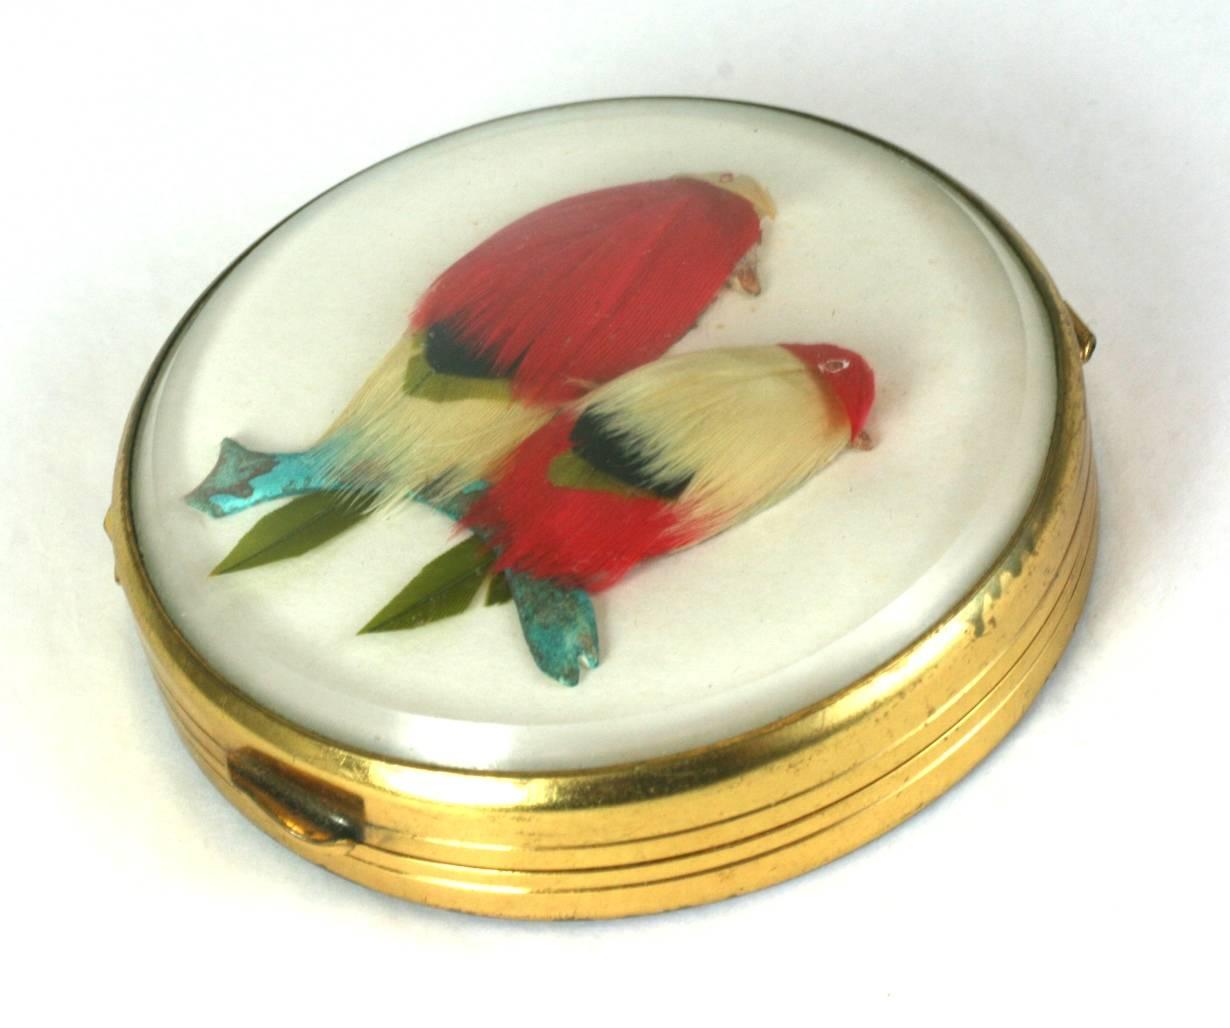 Charming and unusual French Feathered Bird Compact from the 1950's.  A pair of charming feathered birds are perched on a patinaed branch and set under a glass dome with a mirrored interior, powder screen and pad. The base is also glass so you can